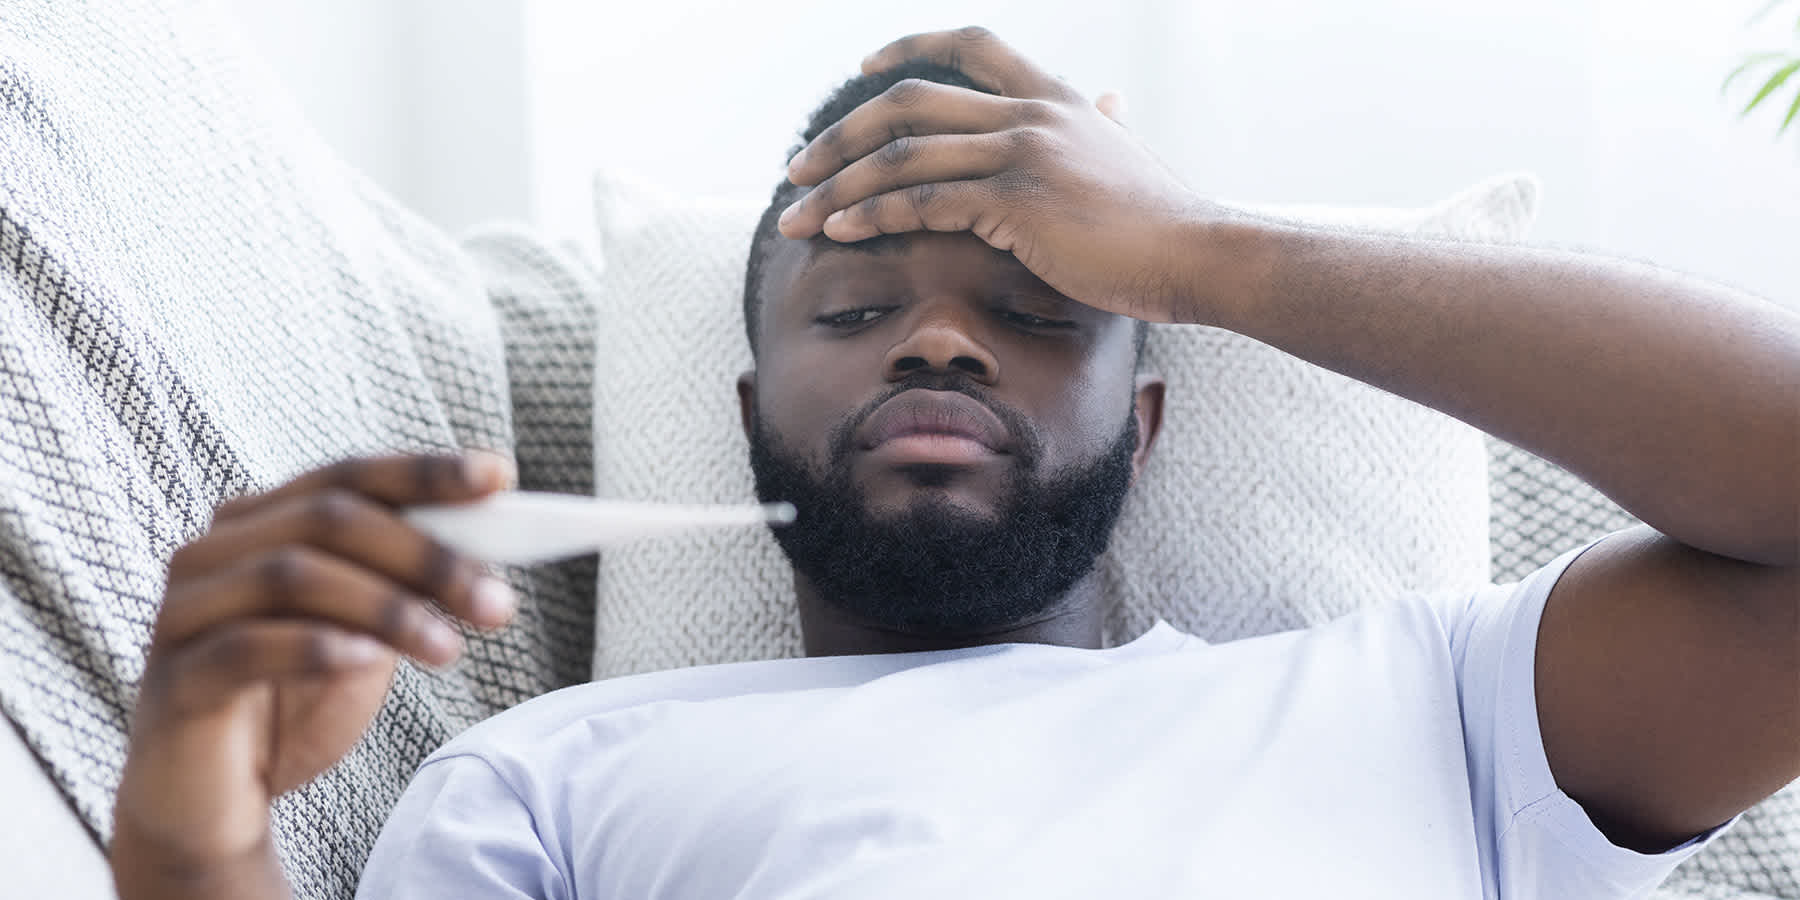 Man with syphilis infection lying down on couch and looking at thermometer while wondering what syphilis looks like